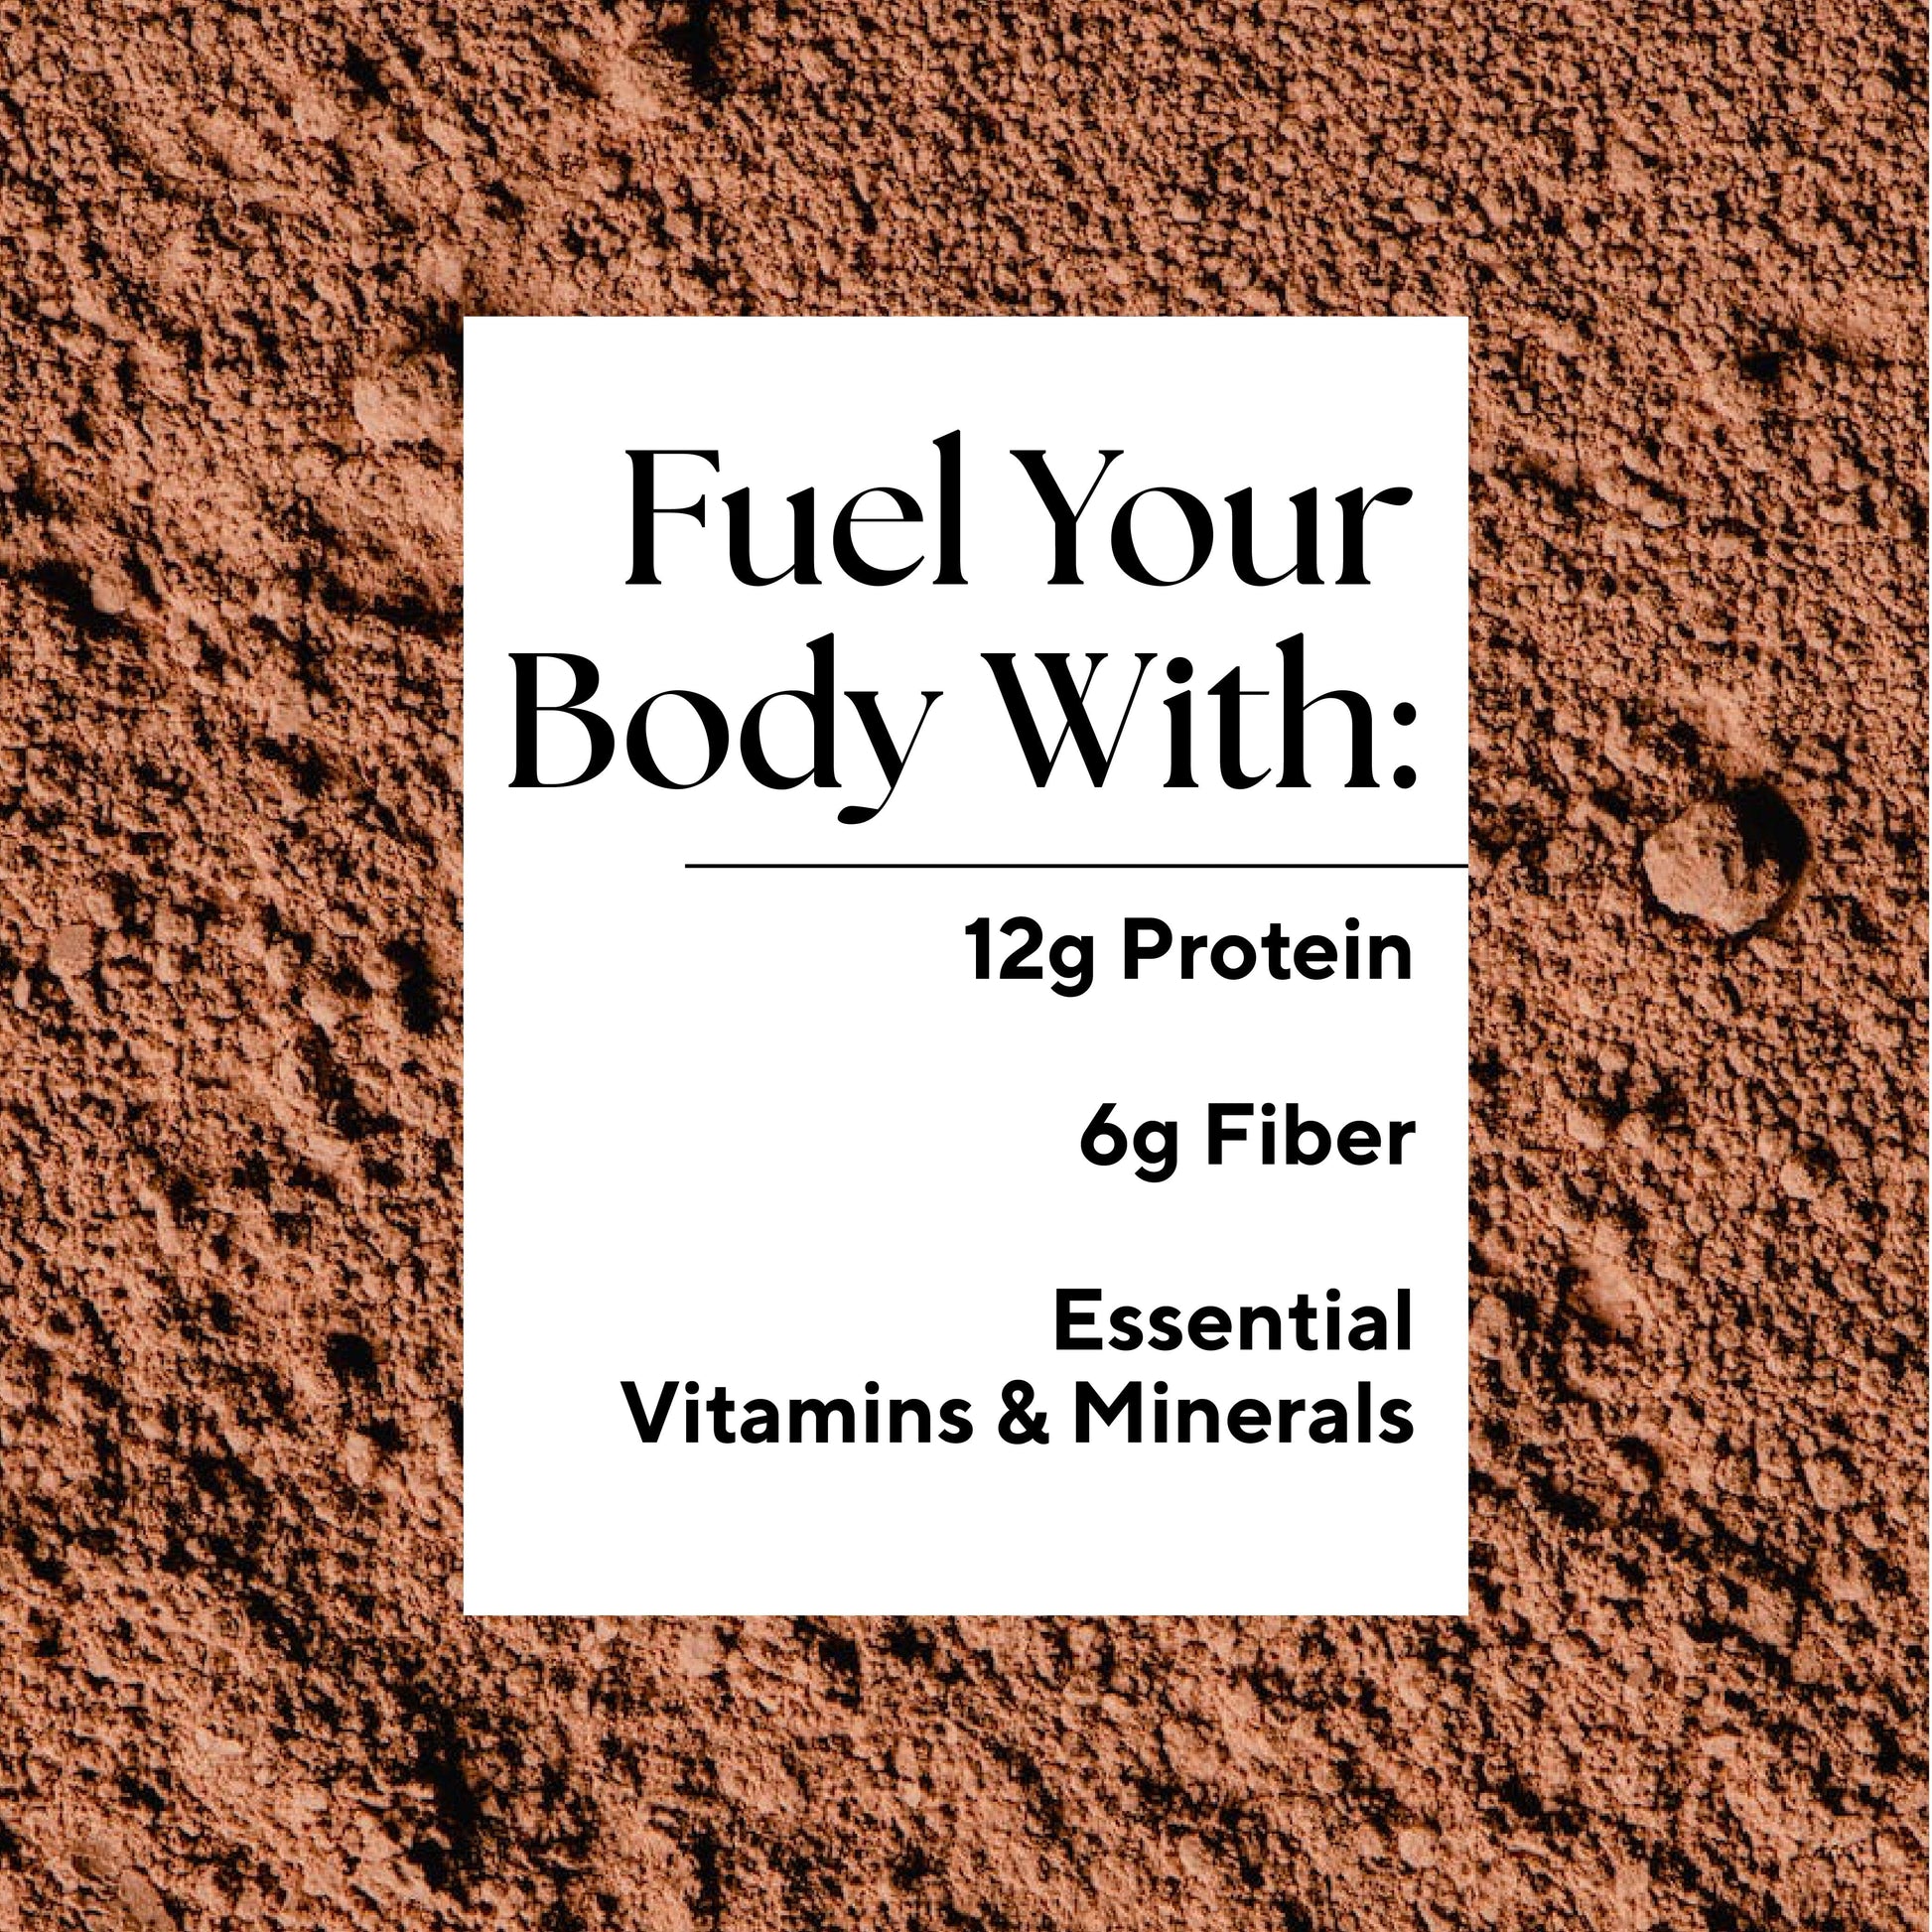 Infographic that reads: "Fuel your body with: 12 grams Protein, 6 grams Fiber, and Essential Vitamins & Minerals